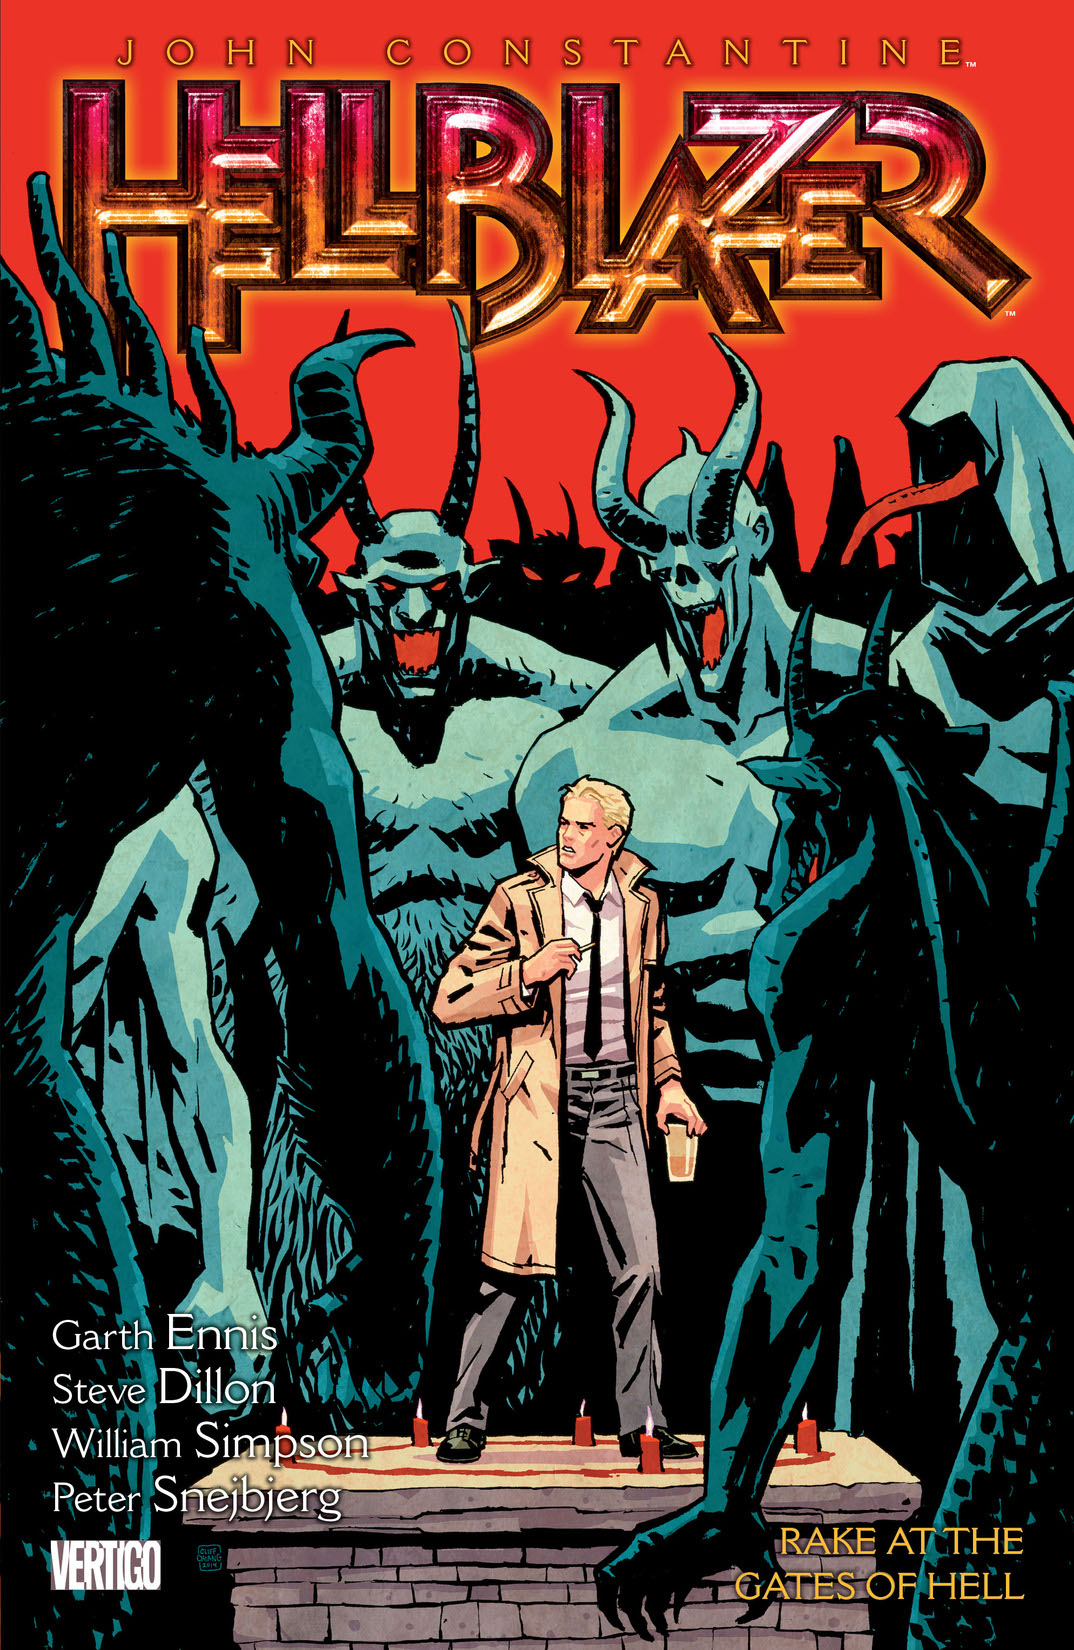 John Constantine, Hellblazer Vol. 8: Rake at the Gates of Hell preview images